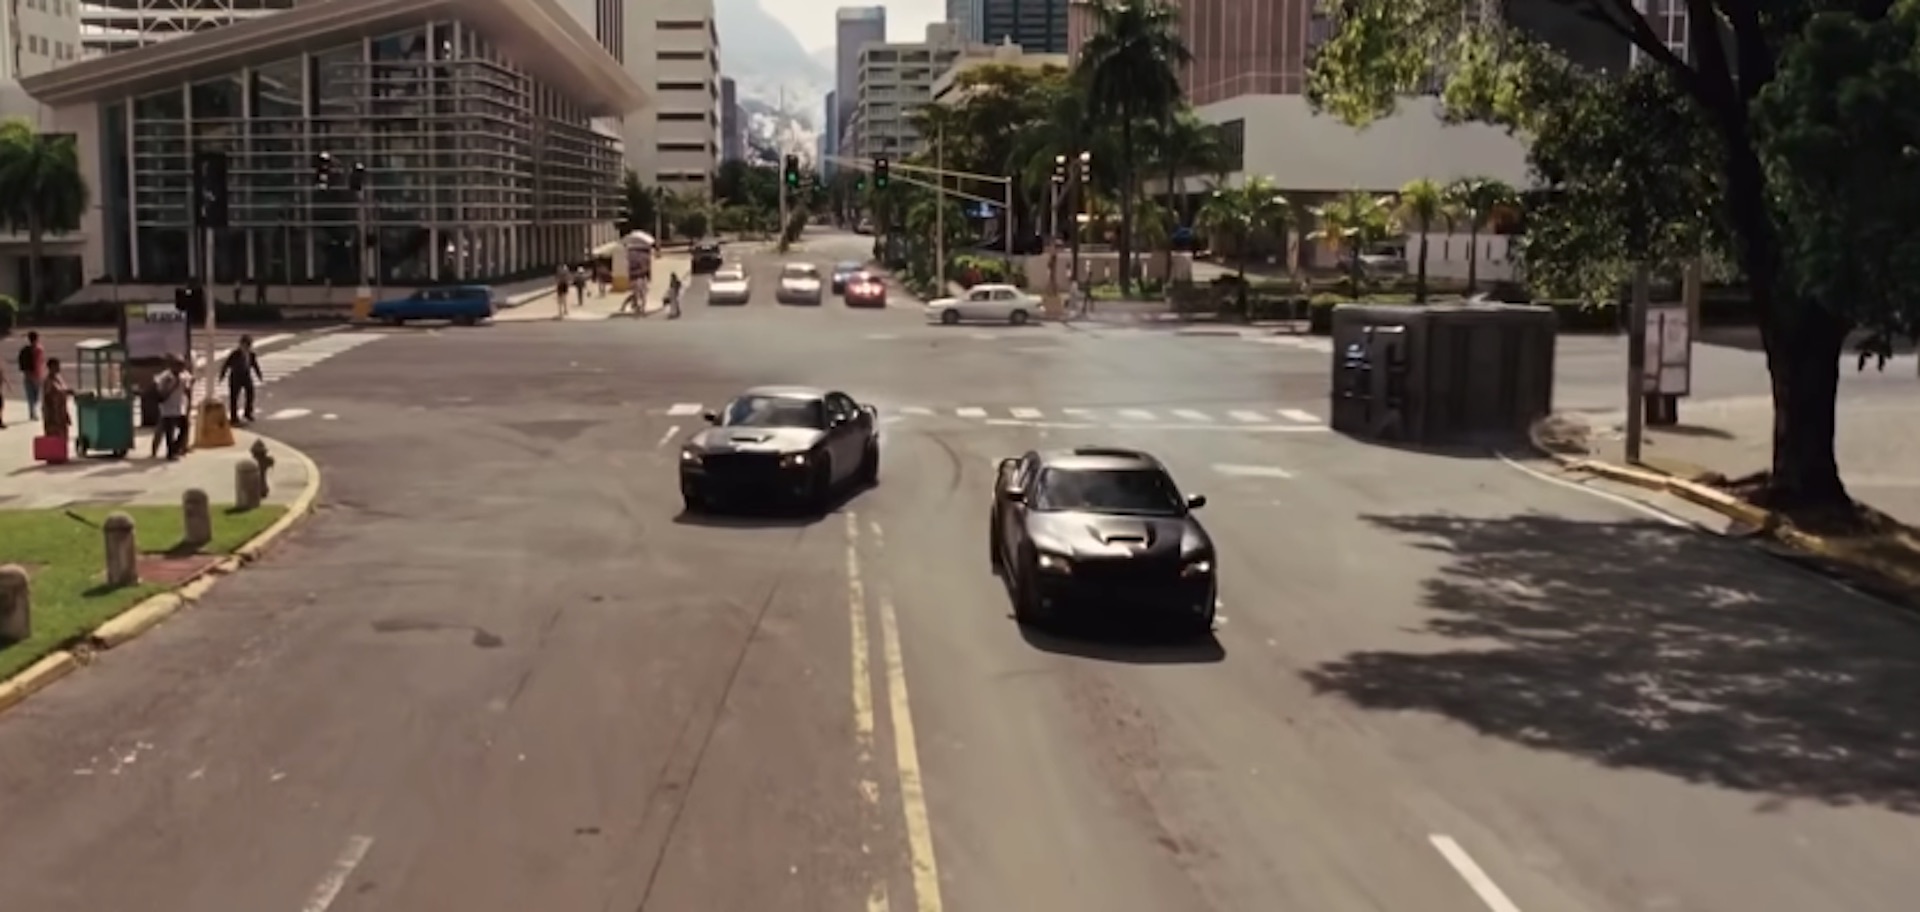 fast five vault chase scene